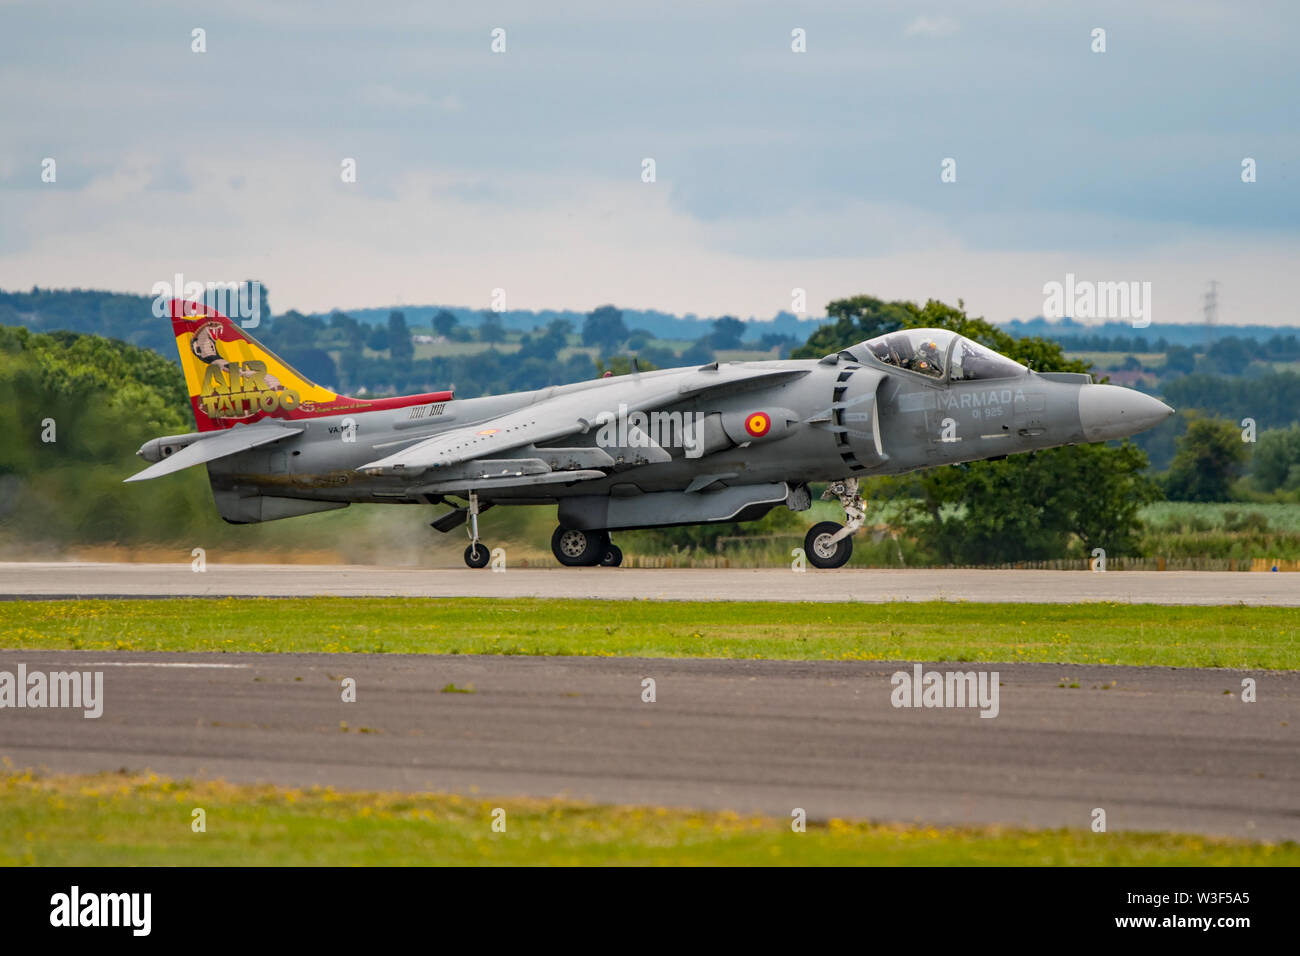 A Spanish Navy  EAV-8B Harrier II Plus fighter aircraft taking part in the flying display for the Air Day at RNAS Yeovilton, UK on 13/7/19. Stock Photo